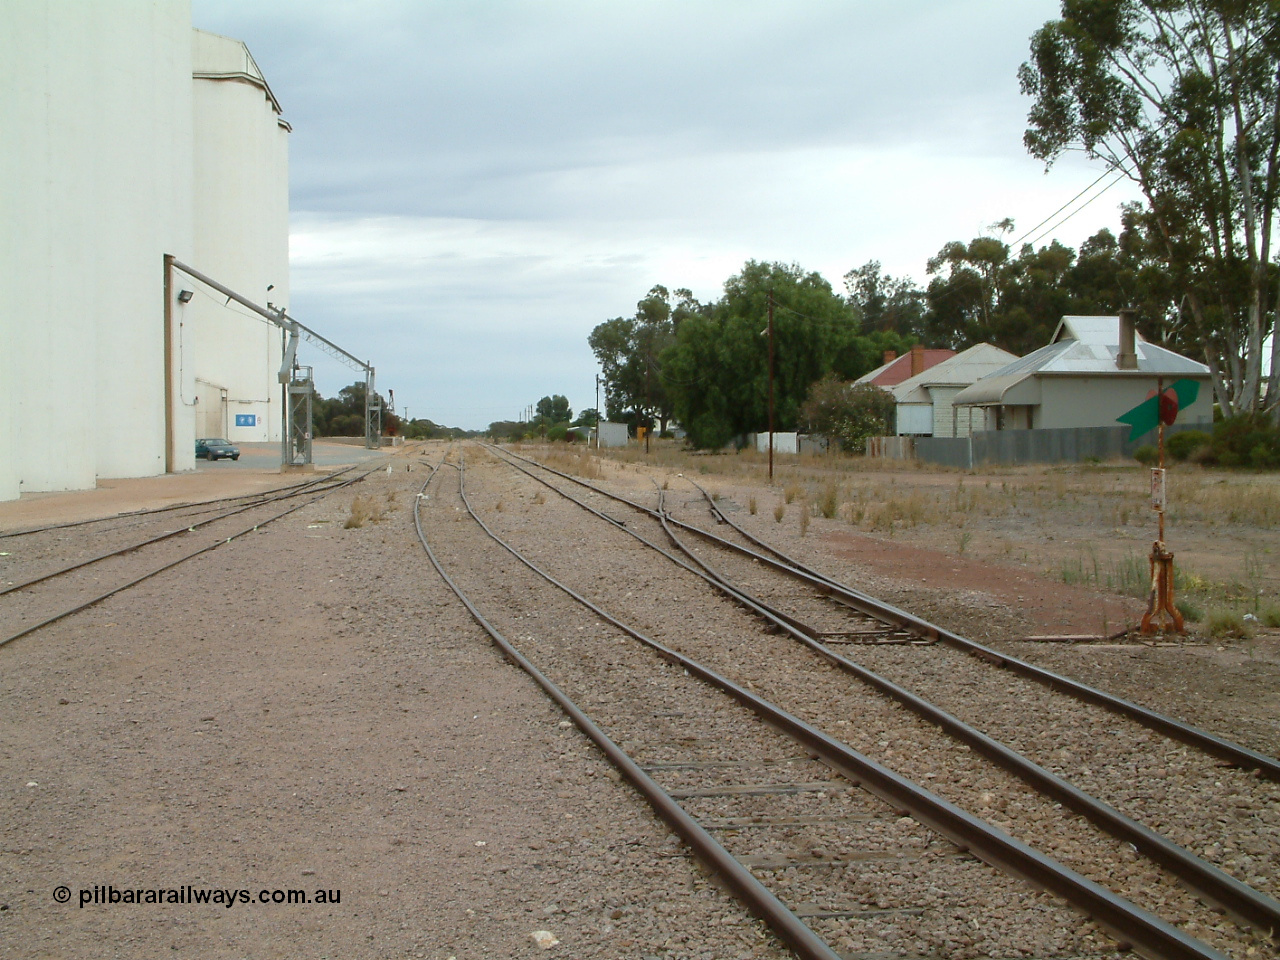 030407 094220
Minnipa, station yard view looking north down No. 3 Road, crossover for grain siding and points for storage roads on the left, points, lever and indicator for No. 1 Road of mainline on the right. 7th April, 2003.
